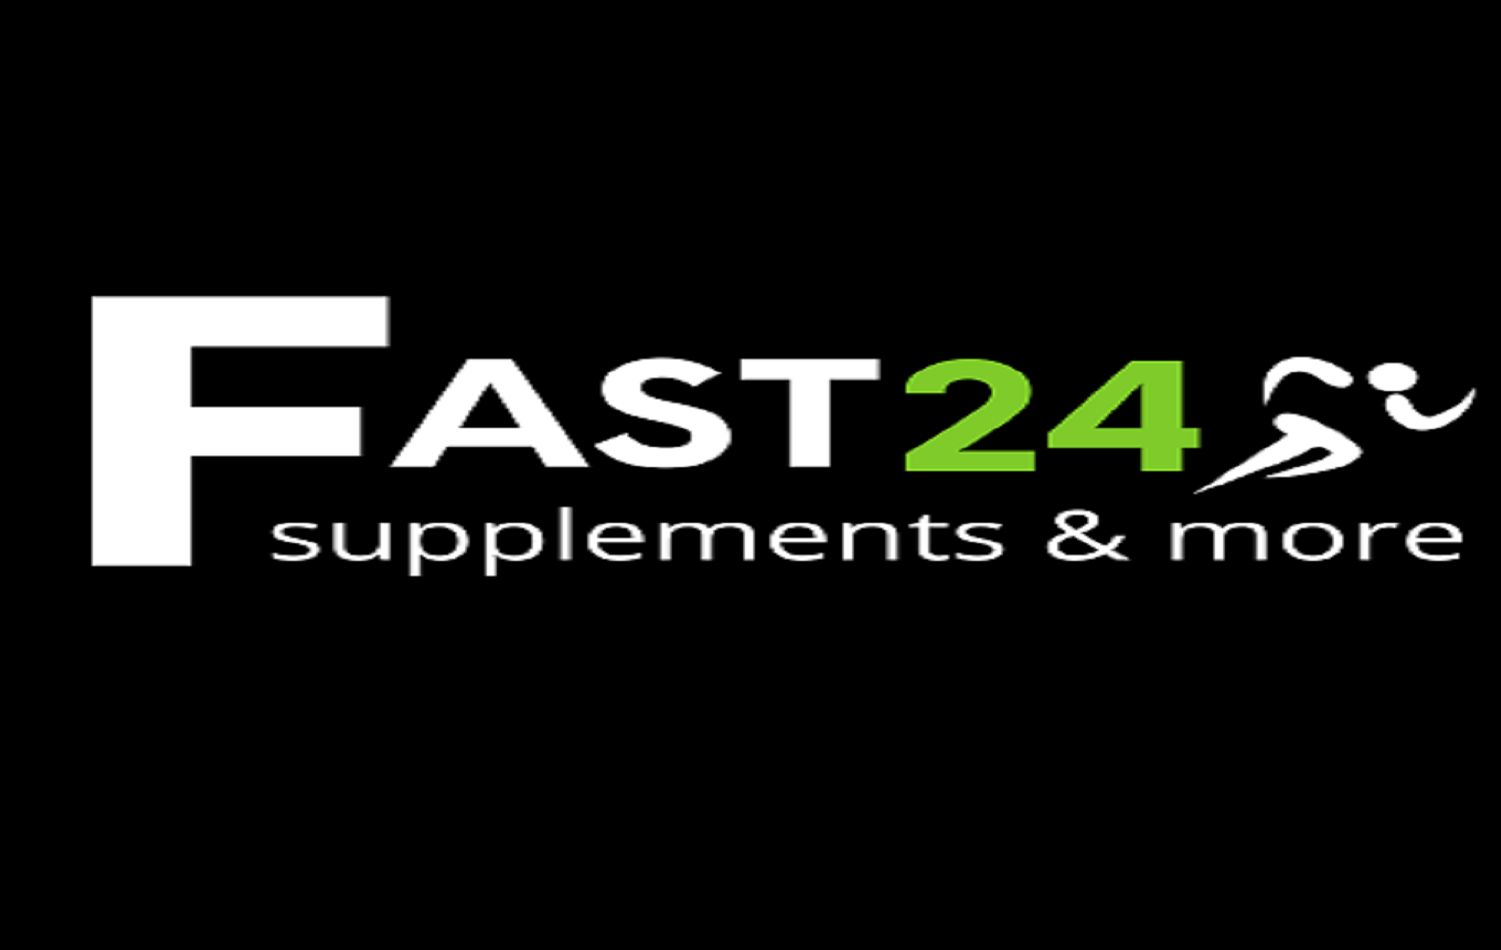 Fast24 supplements